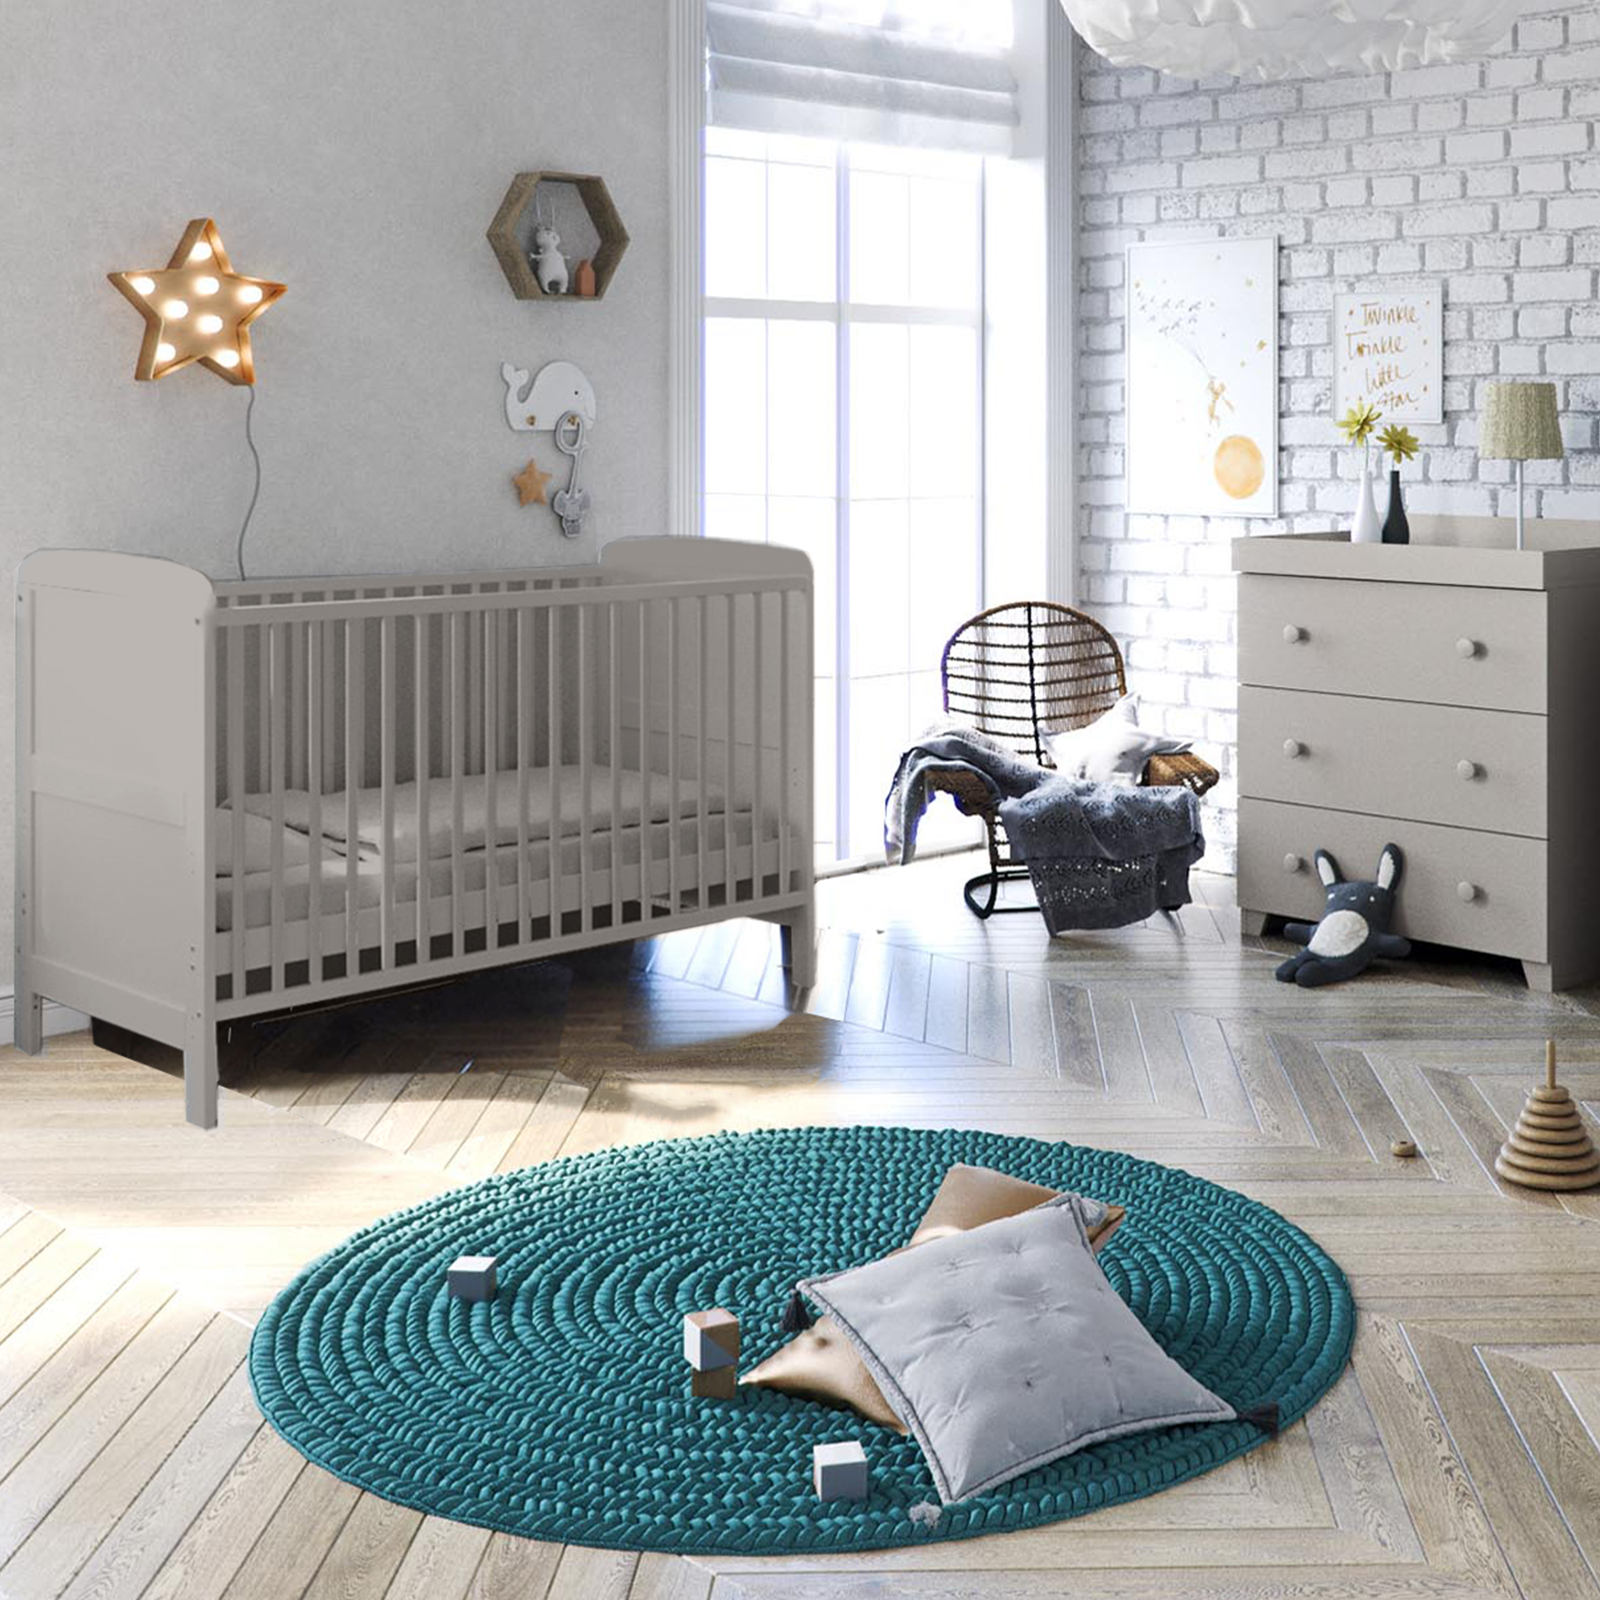 Puggle Henbury Cot Bed 4 Piece Nursery Furniture Set With Maxi Air Cool Mattress - Classic Grey